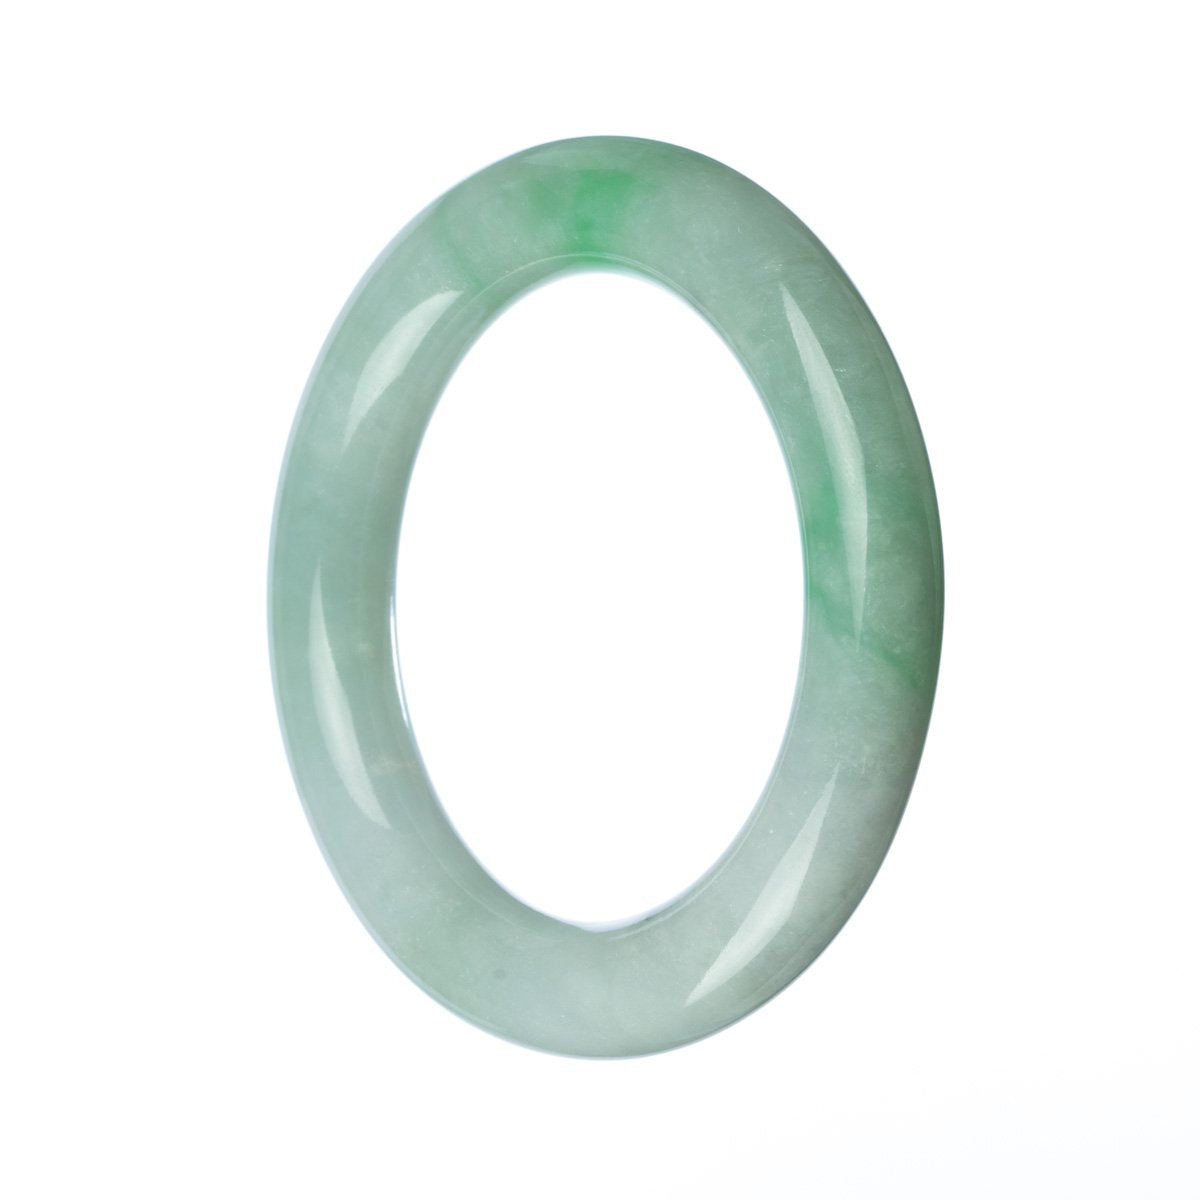 A round, untreated green traditional jade bangle bracelet measuring 58mm in diameter. Made by MAYS.